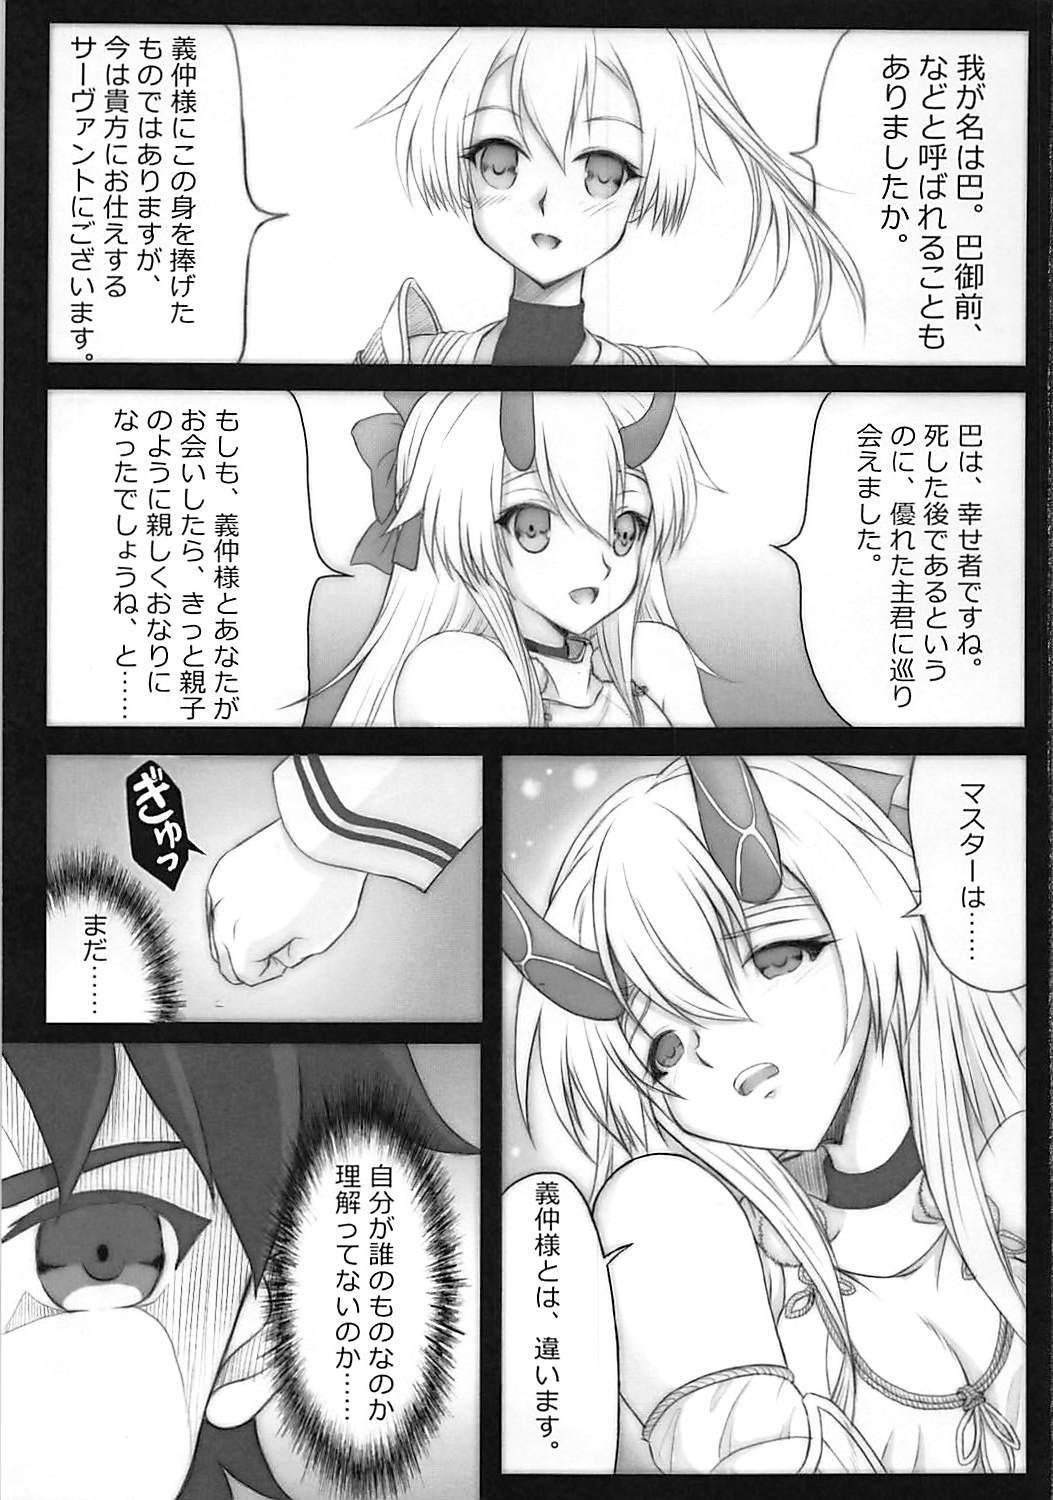 Home TOMOE Sange - Fate grand order Jerking - Page 2